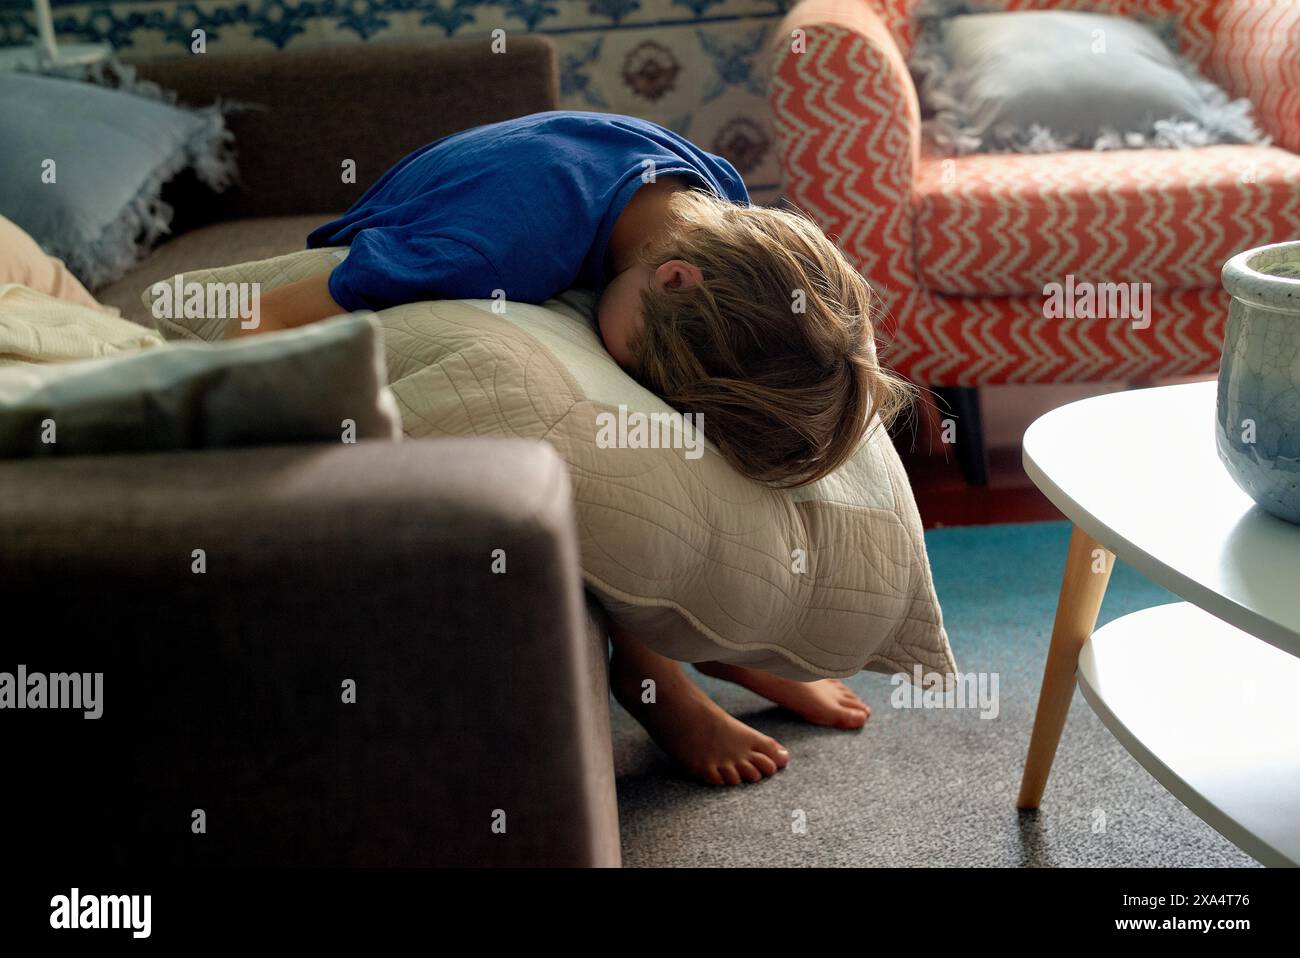 A person is taking a nap on a couch with their head resting on a cushion, in a cozy living room setting. Stock Photo